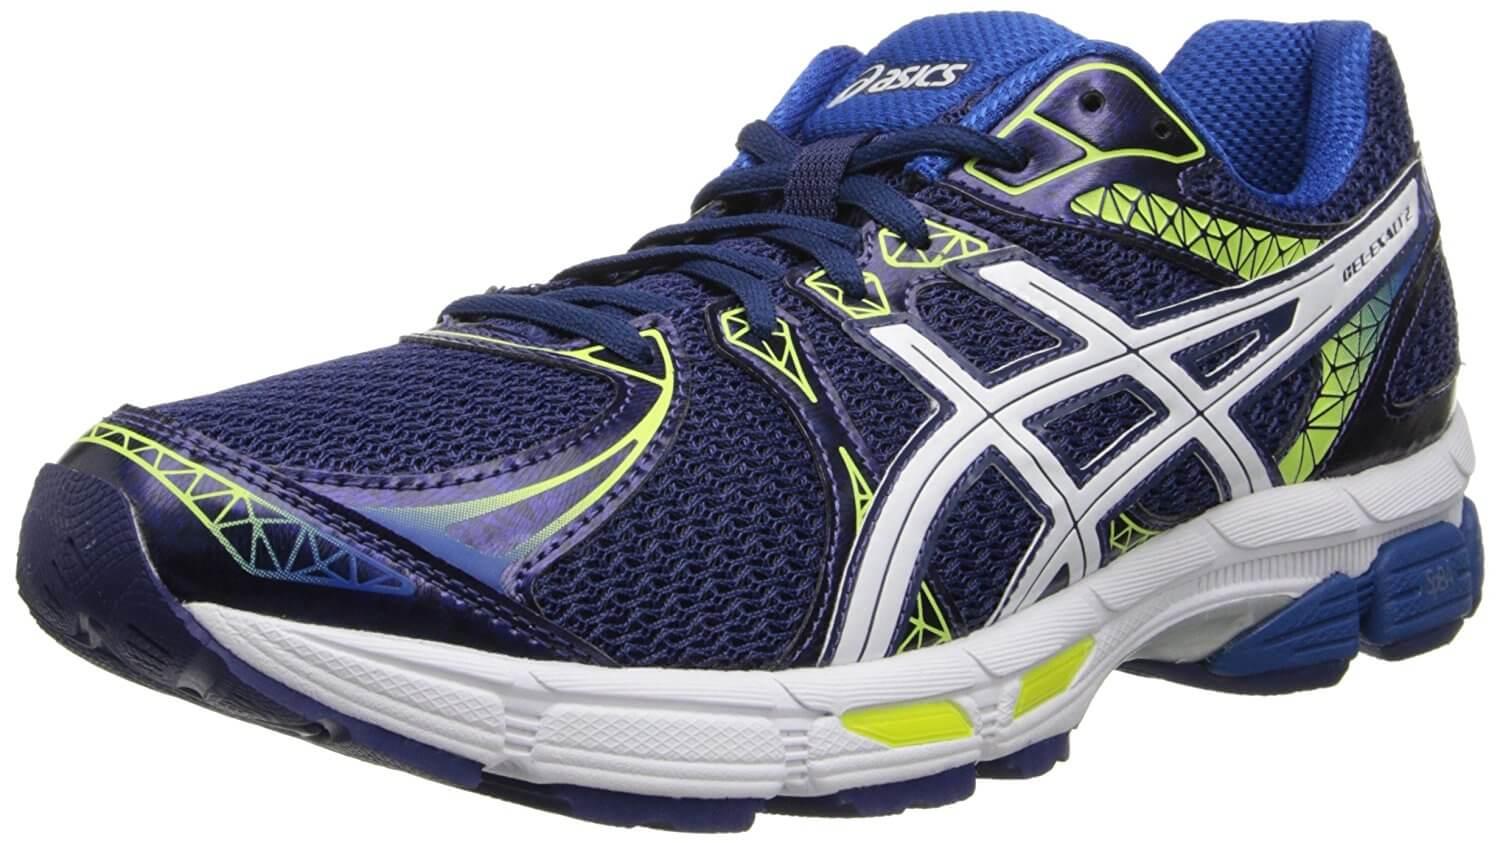 The ASICS Gel Exalt 2 running shoe is highly supportive and perfect for beginners.